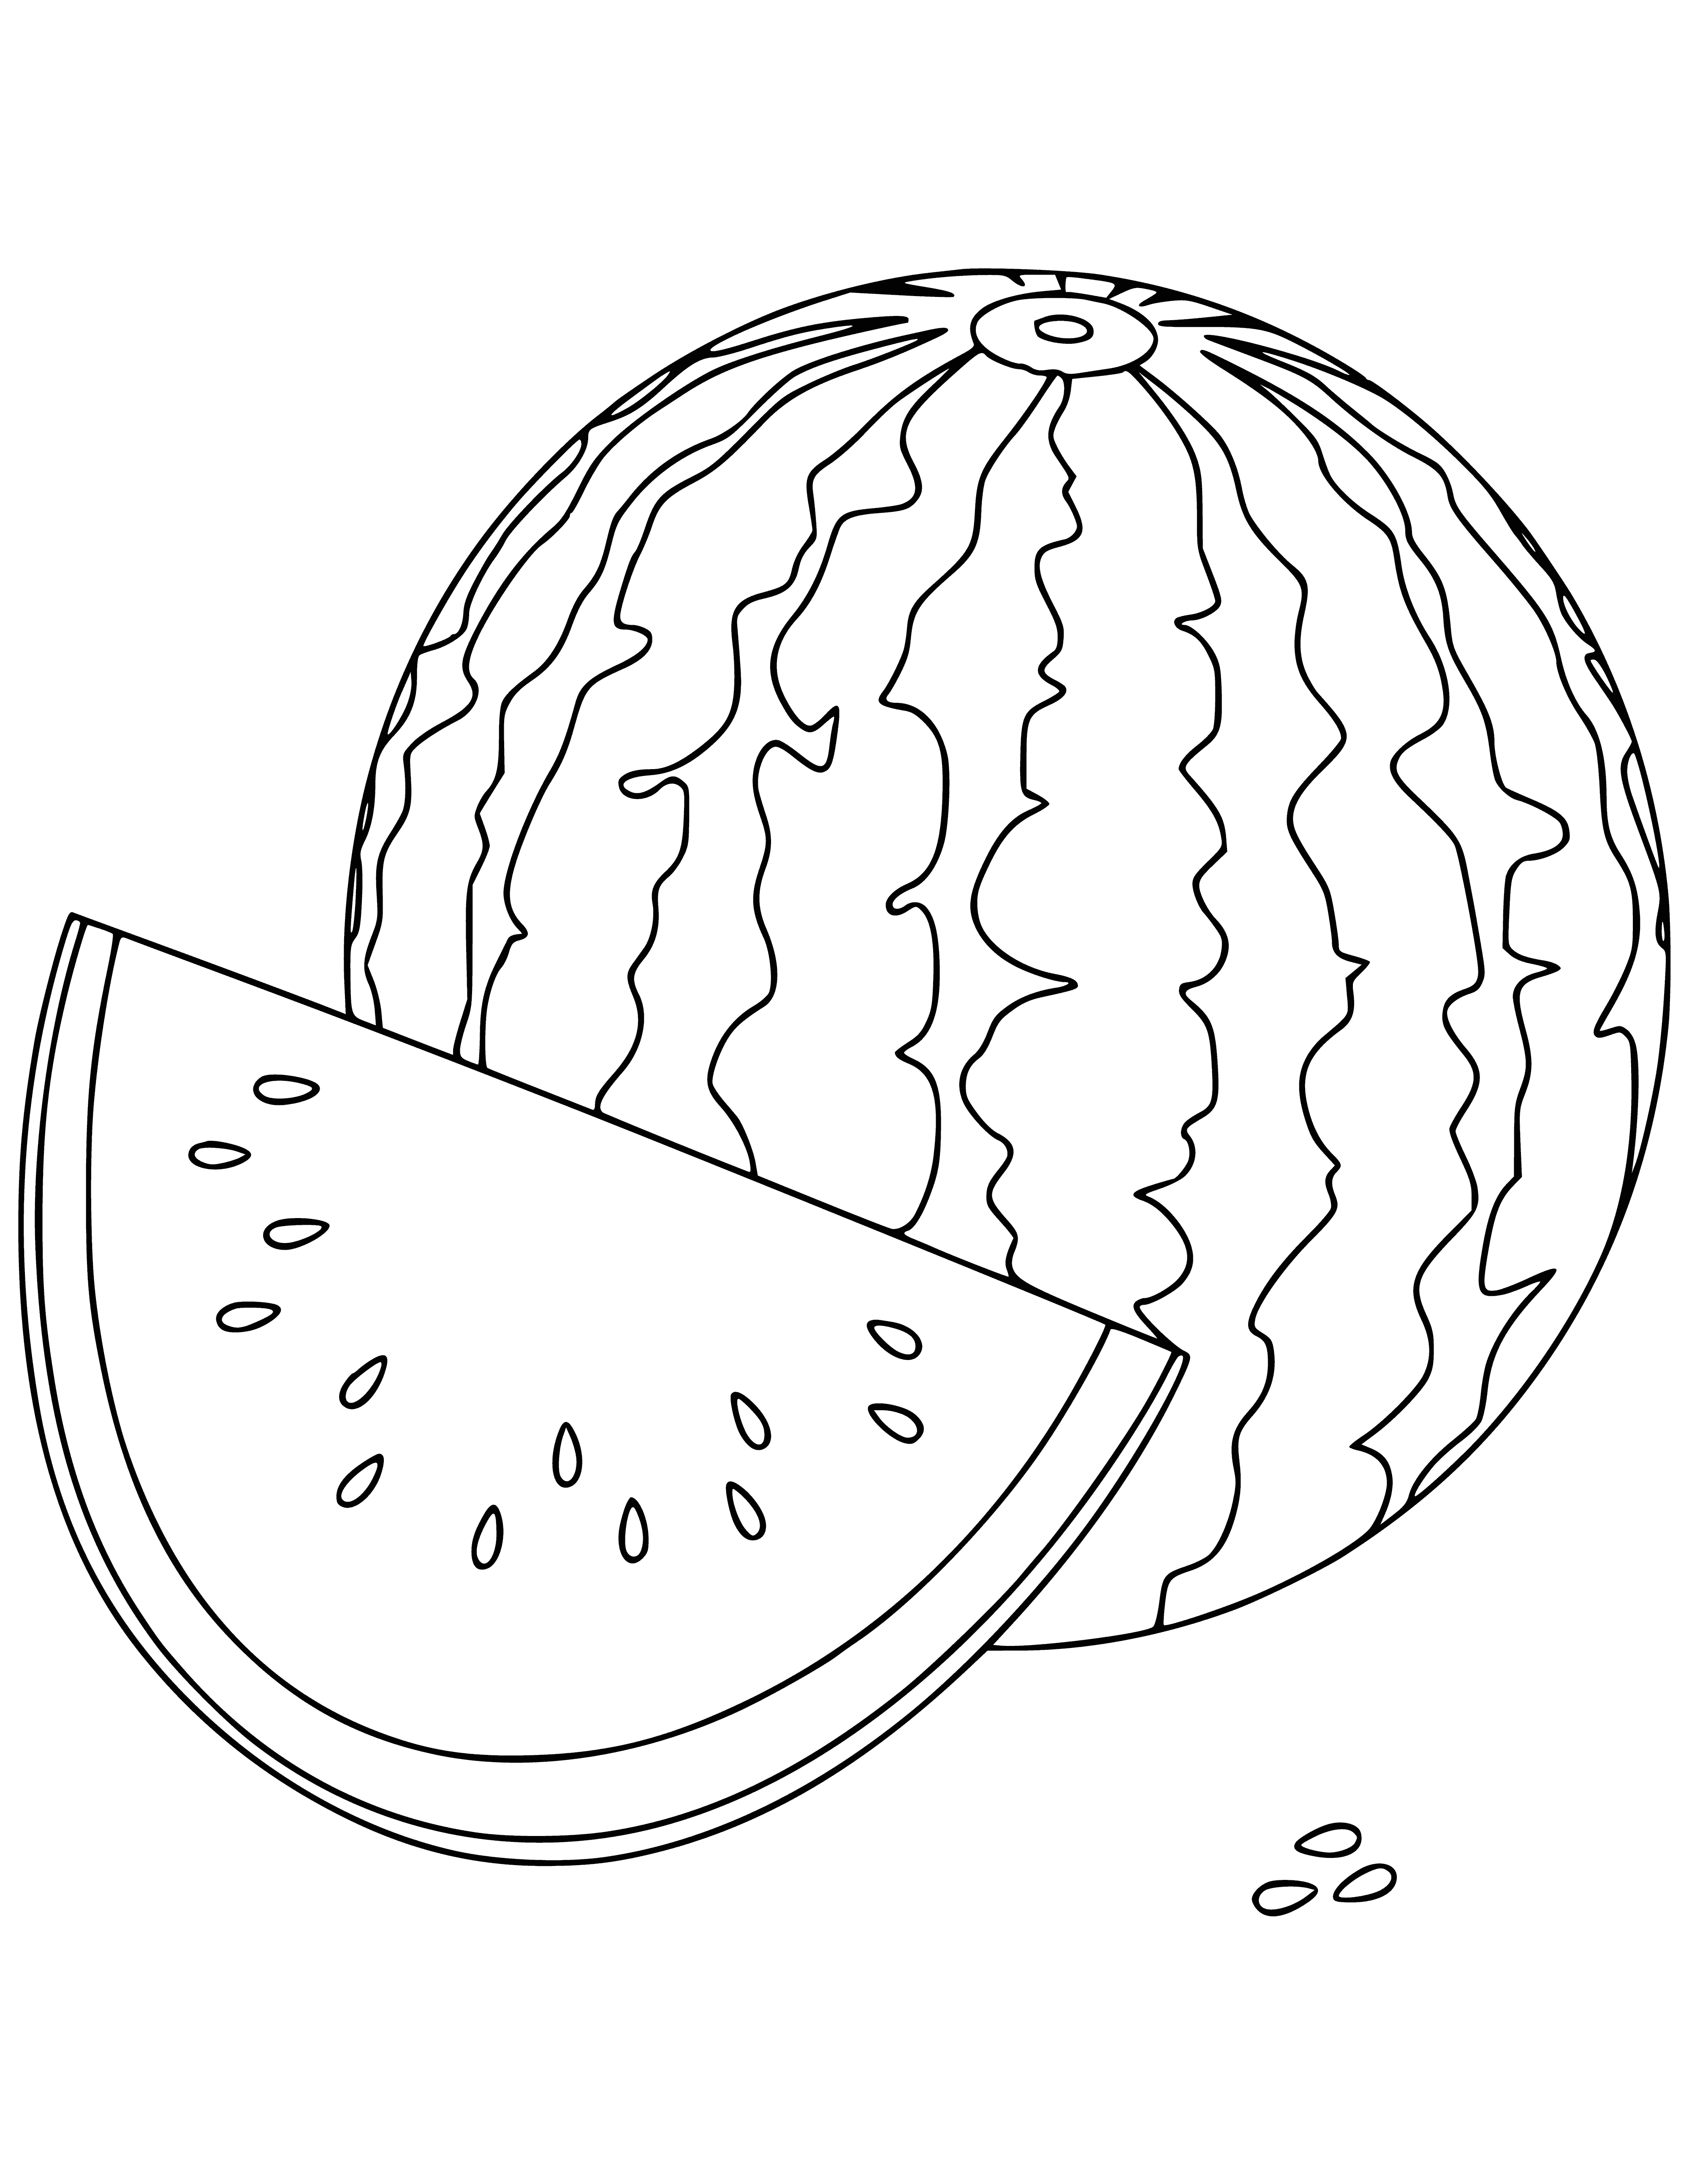 coloring page: A watermelon sliced in half with red insides & green rind showing its seeds.